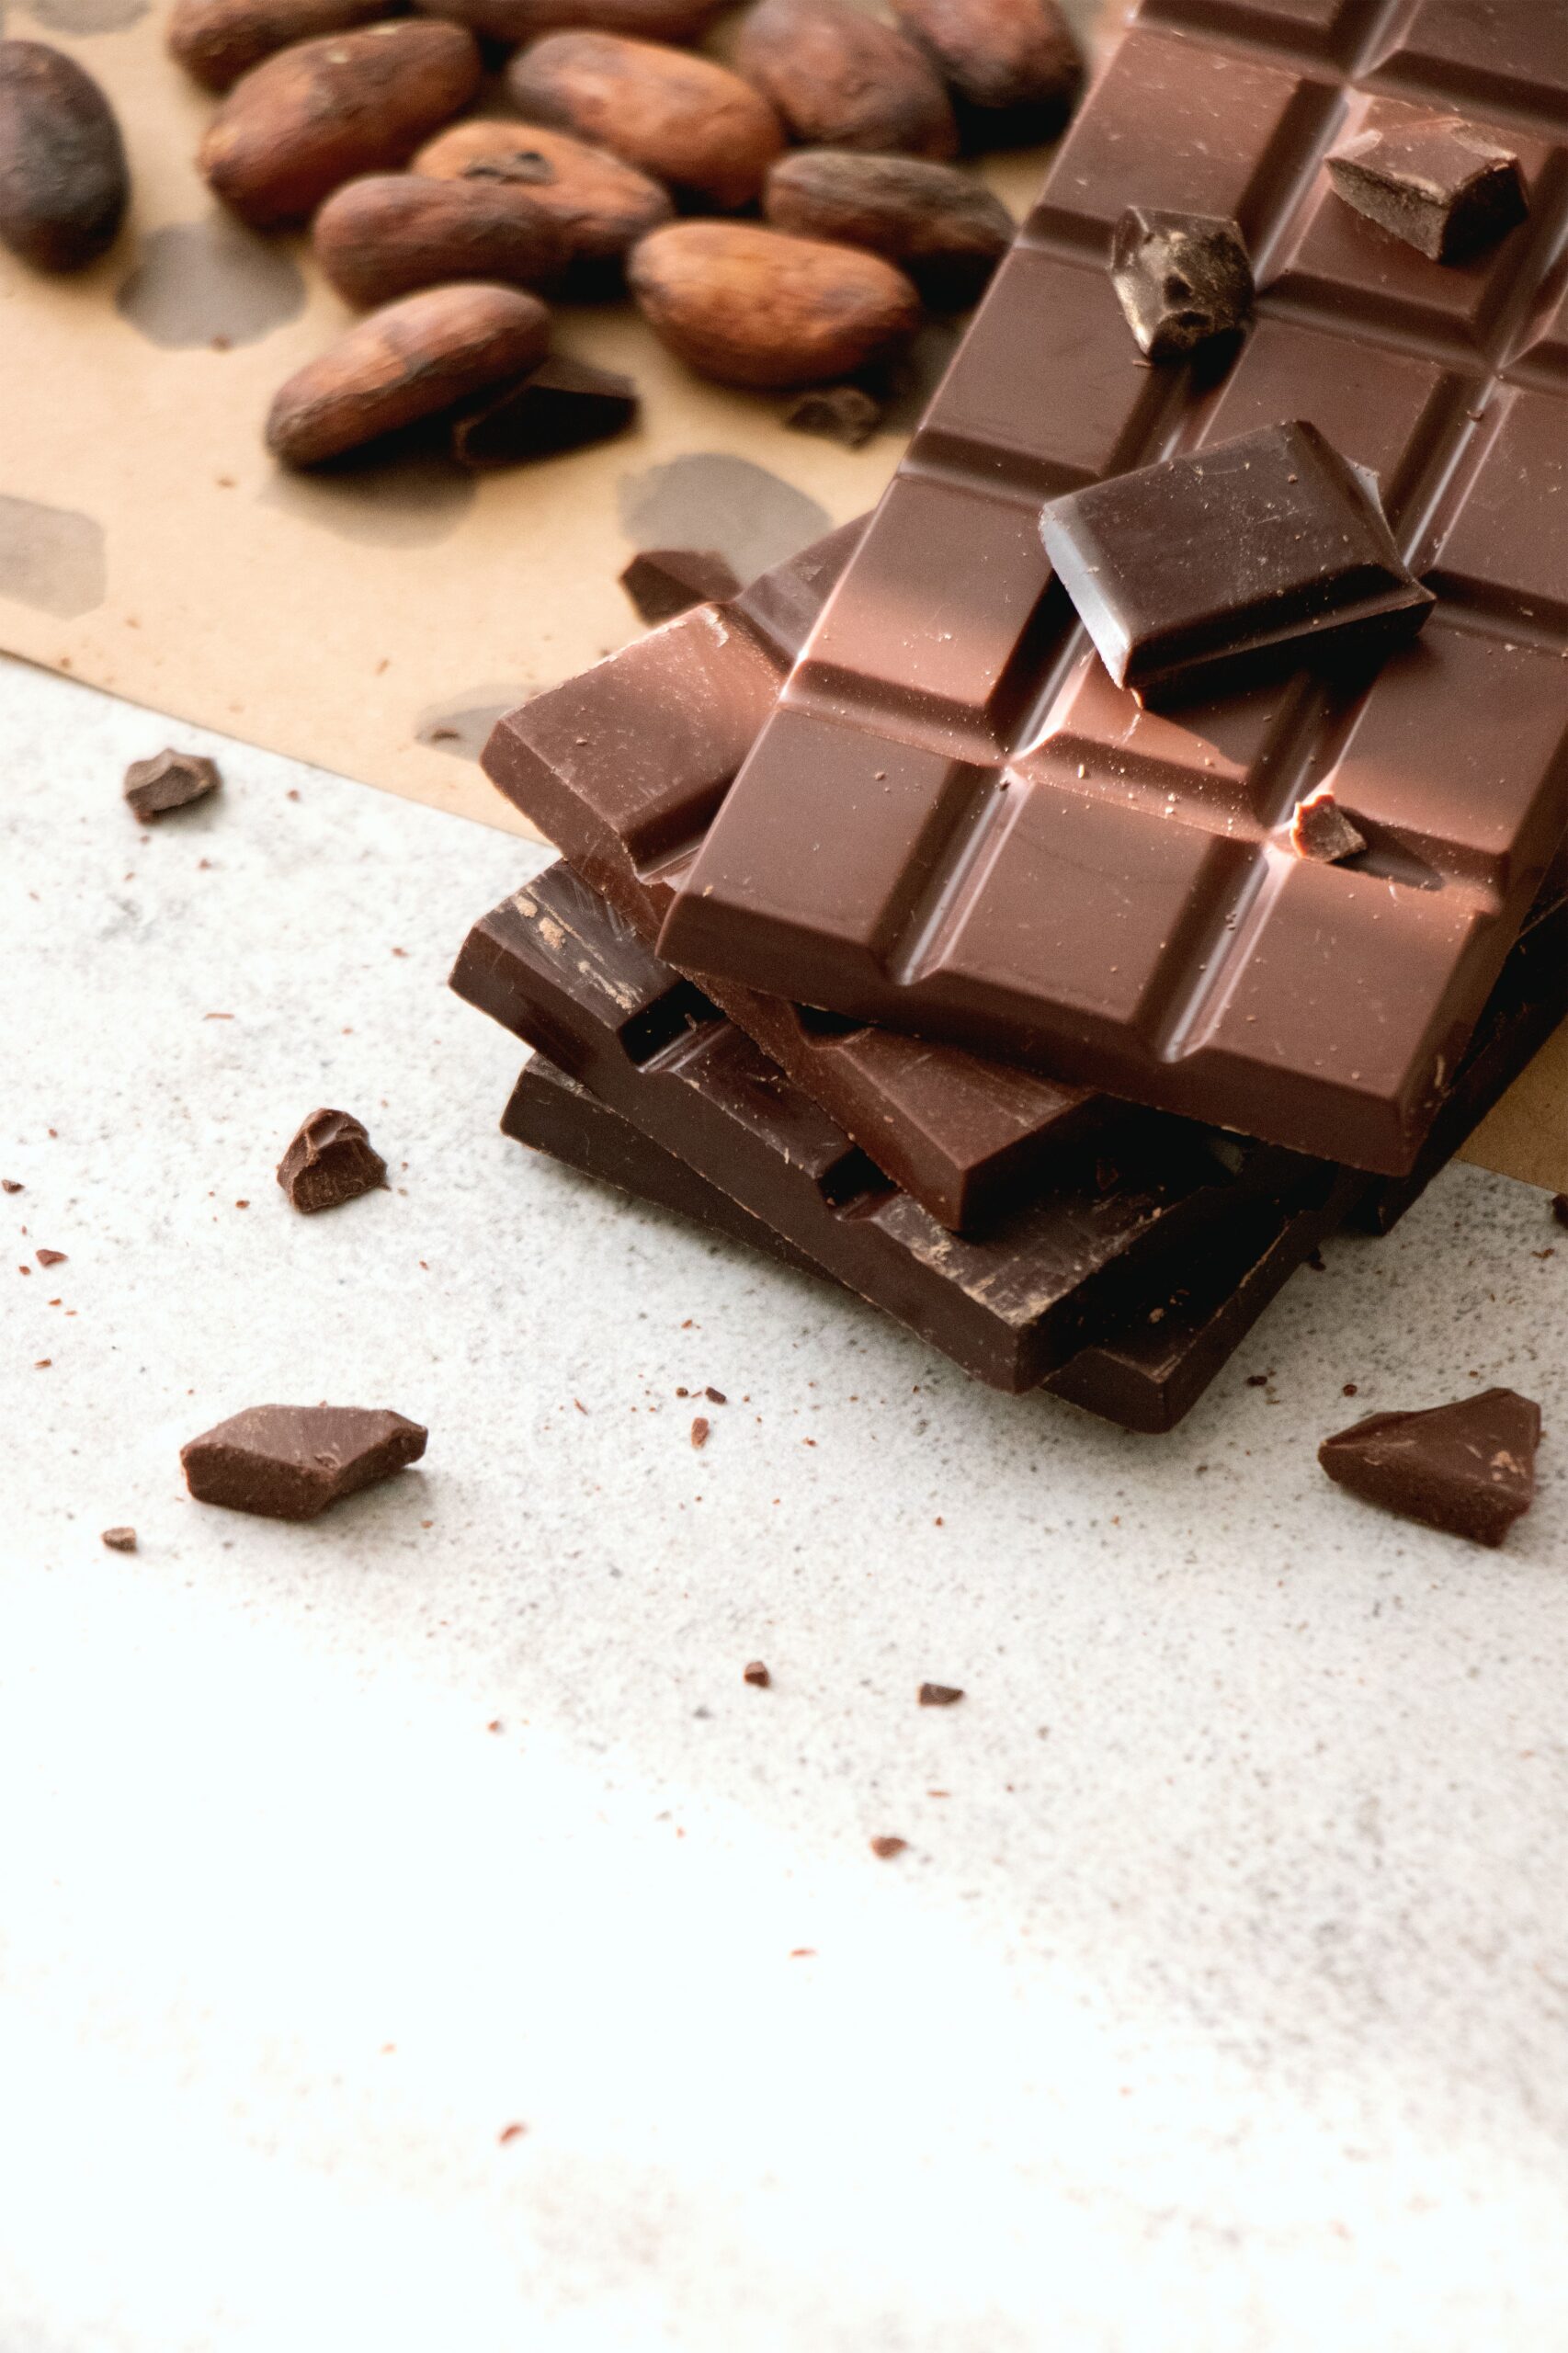 Top 7 health benefits of eating chocolate every day